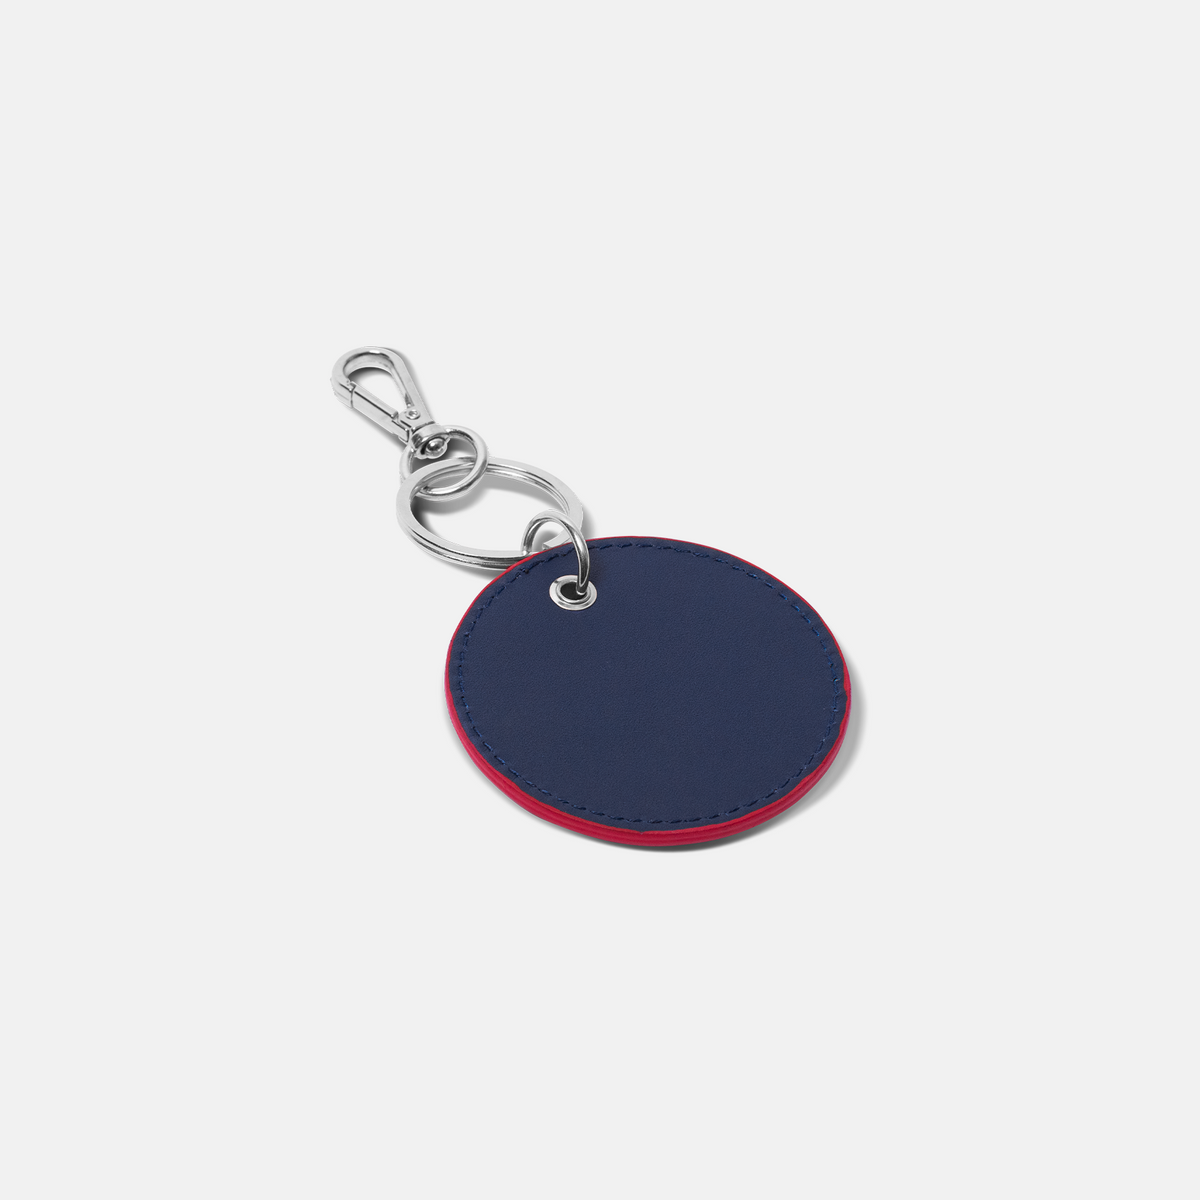 Never Lost Keychain - Navy Blue